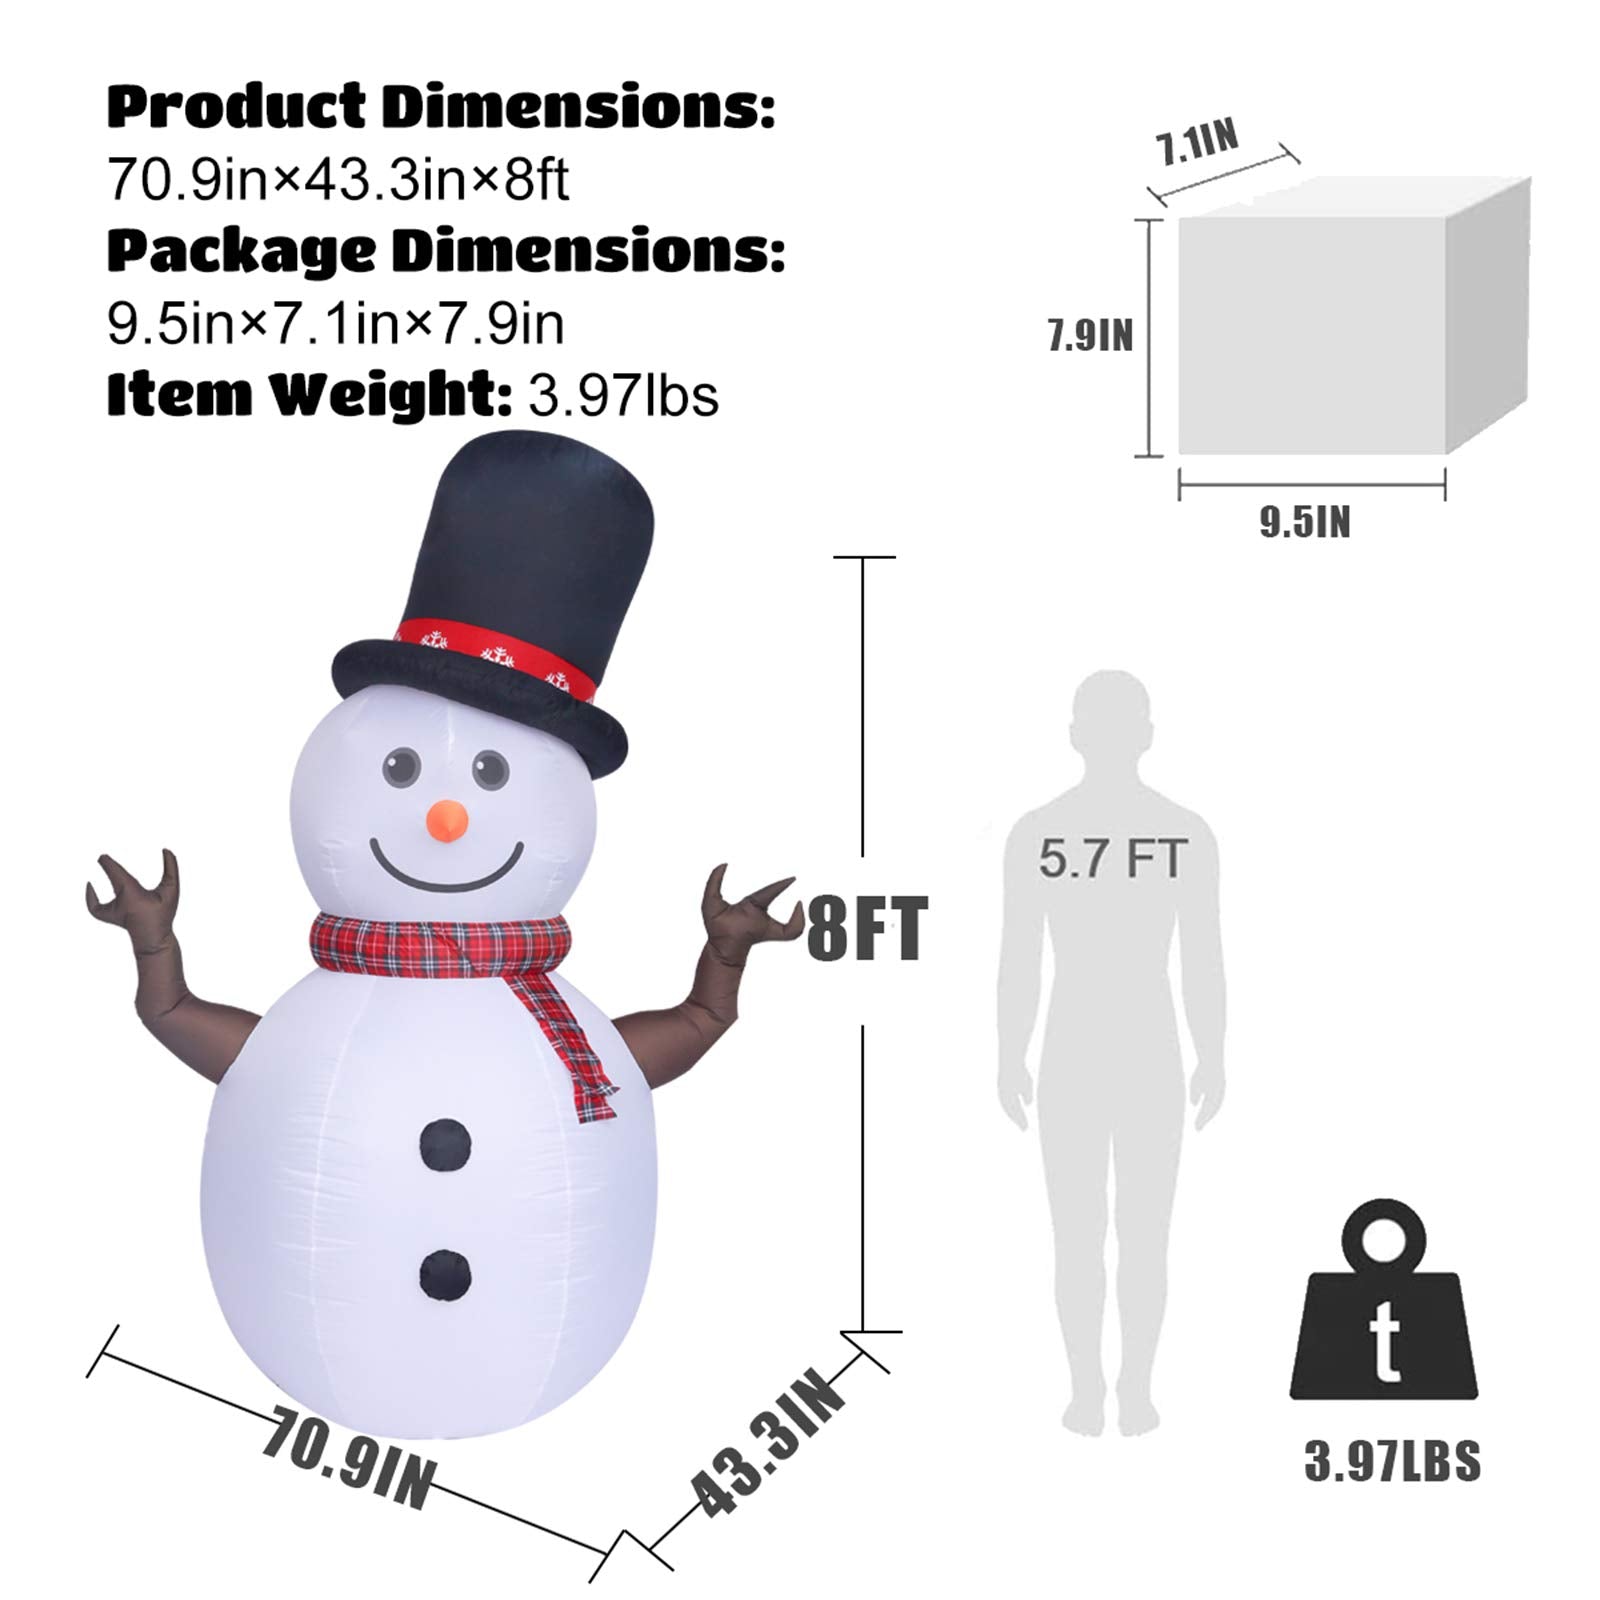 8ft Christmas Inflatable Decorations Rotating Snowman With Colored LED Built Lighted, Christmas Inflatable, Christmas Inflatable Decoration, Holiday Season Inflatable, Christmas inflatables, Christmas inflatables on Sale, Christmas inflatables 2022, Christmas inflatables lowes, Christmas inflatables wholesale